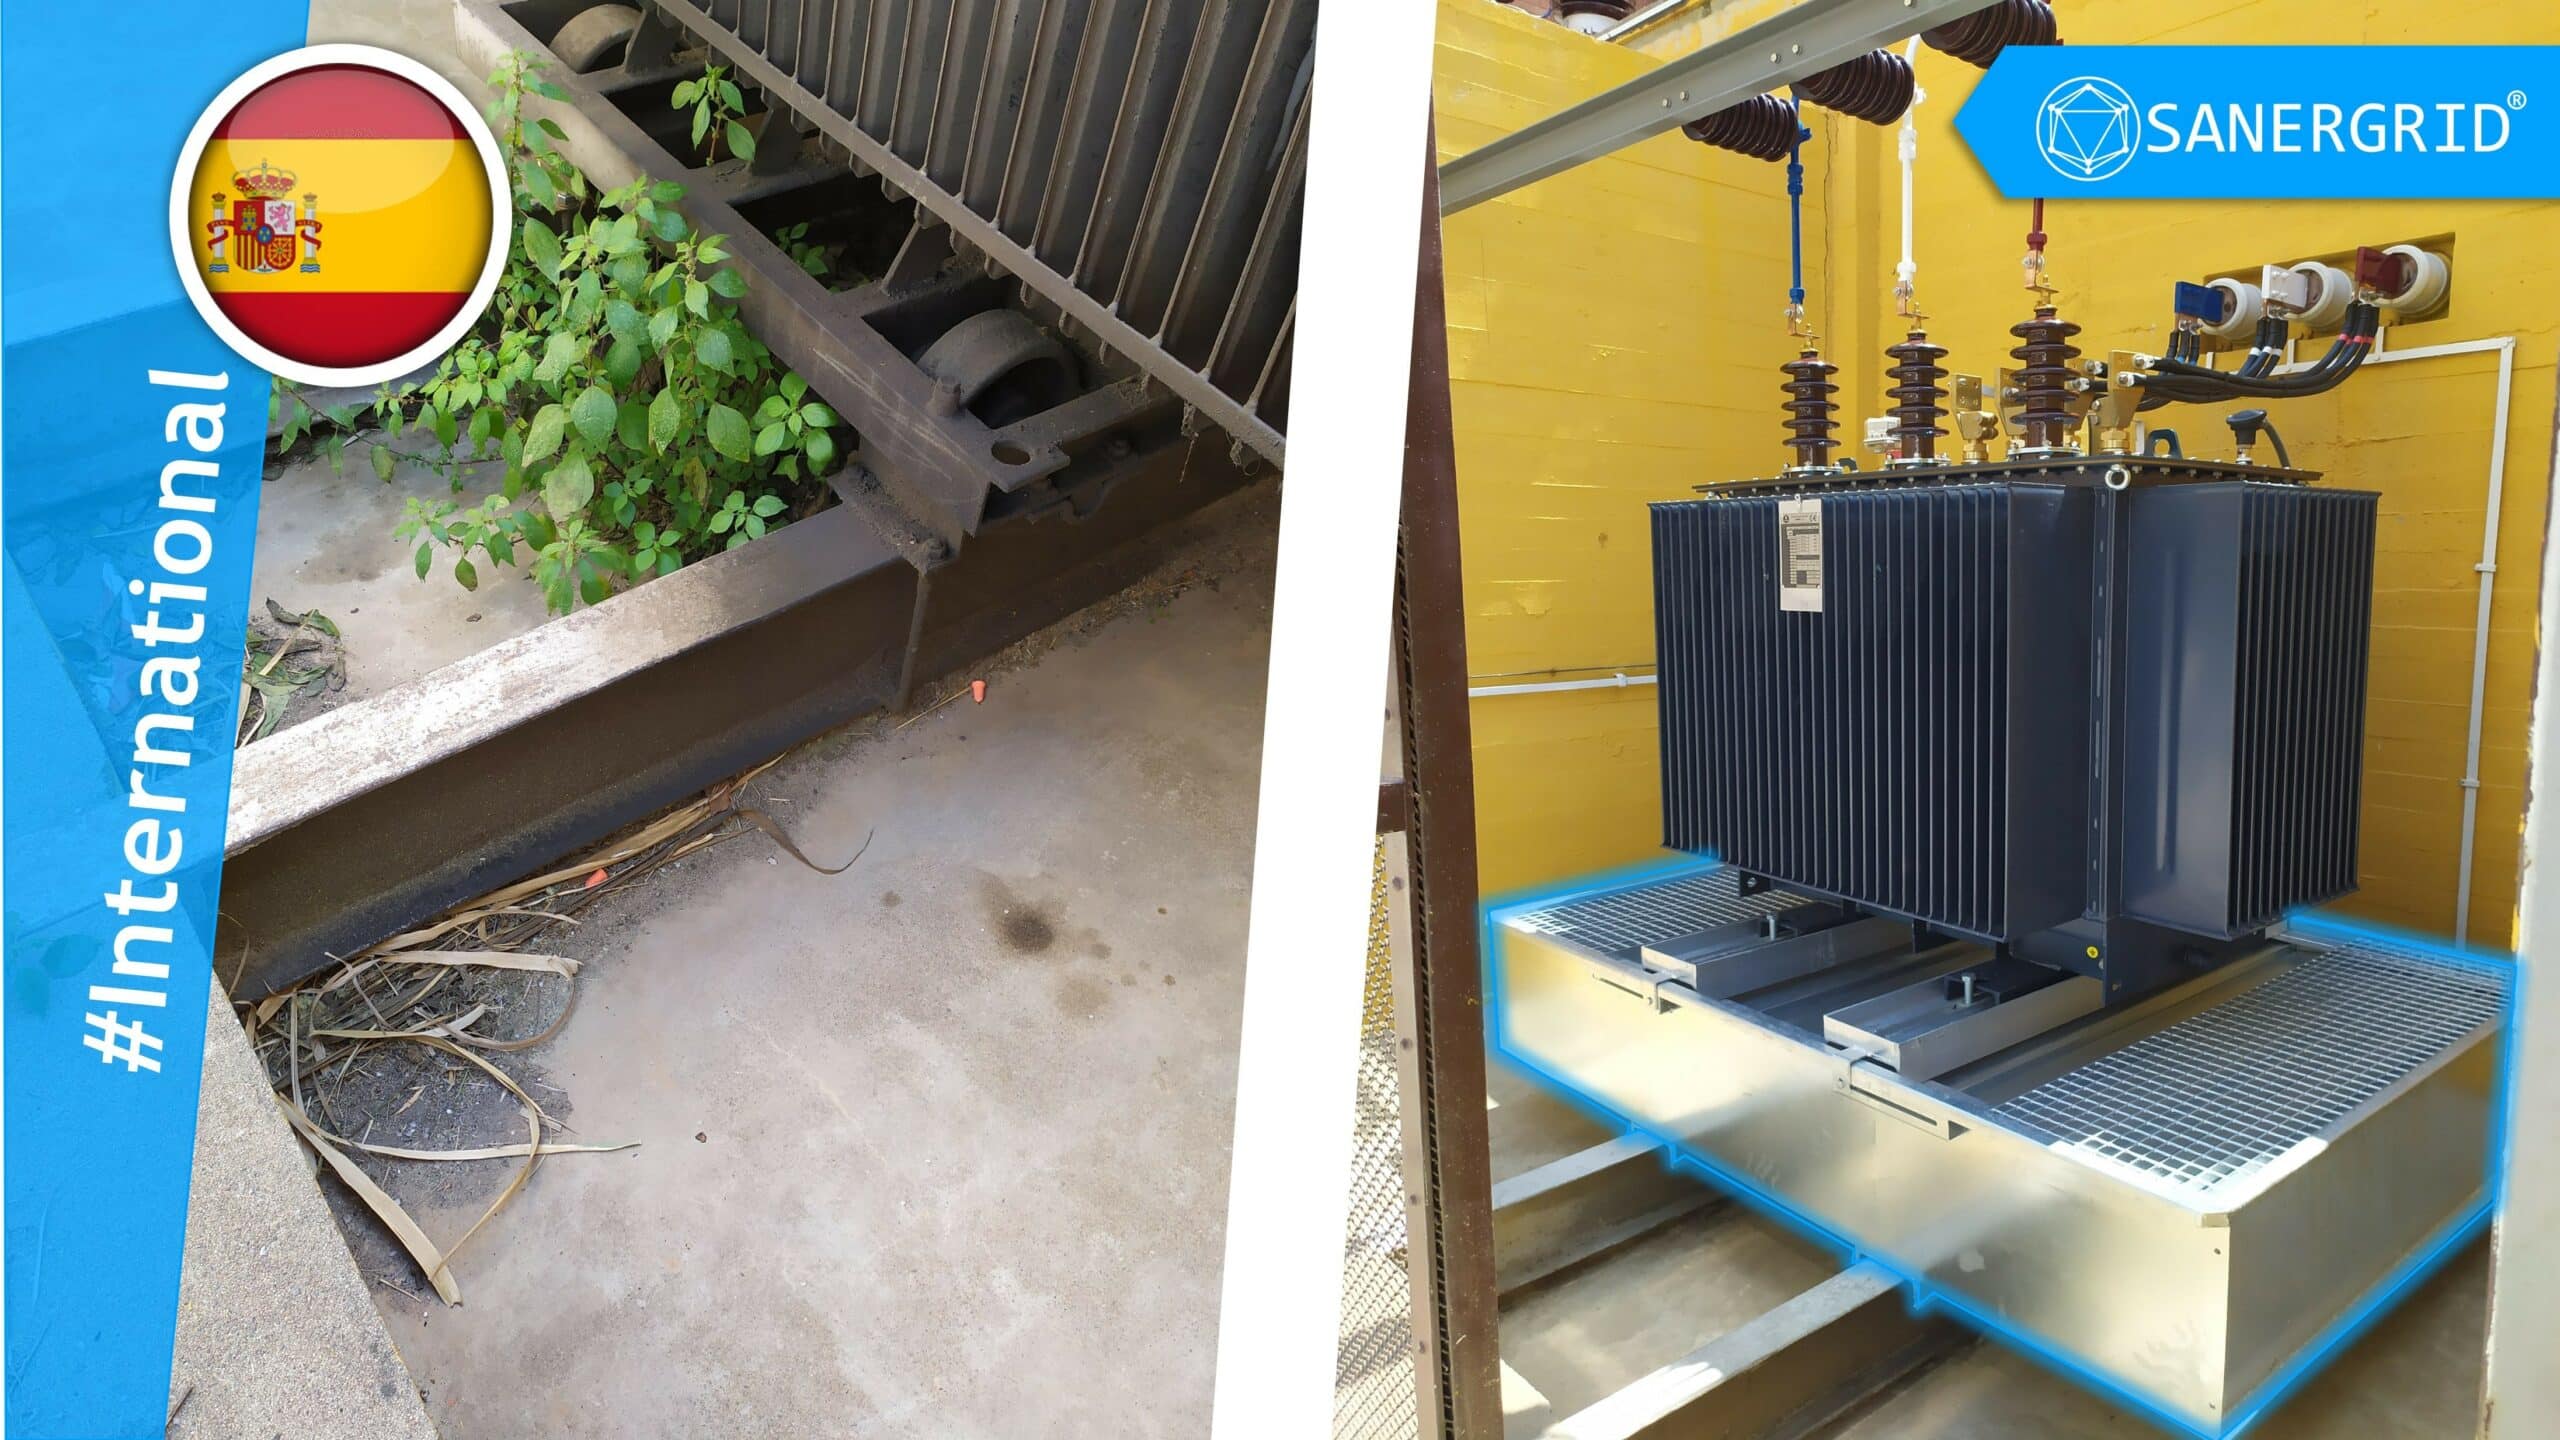 Renovation of a transformer substation with Dishelec 65 and a custom-made ERT fire-resistant retention tank.